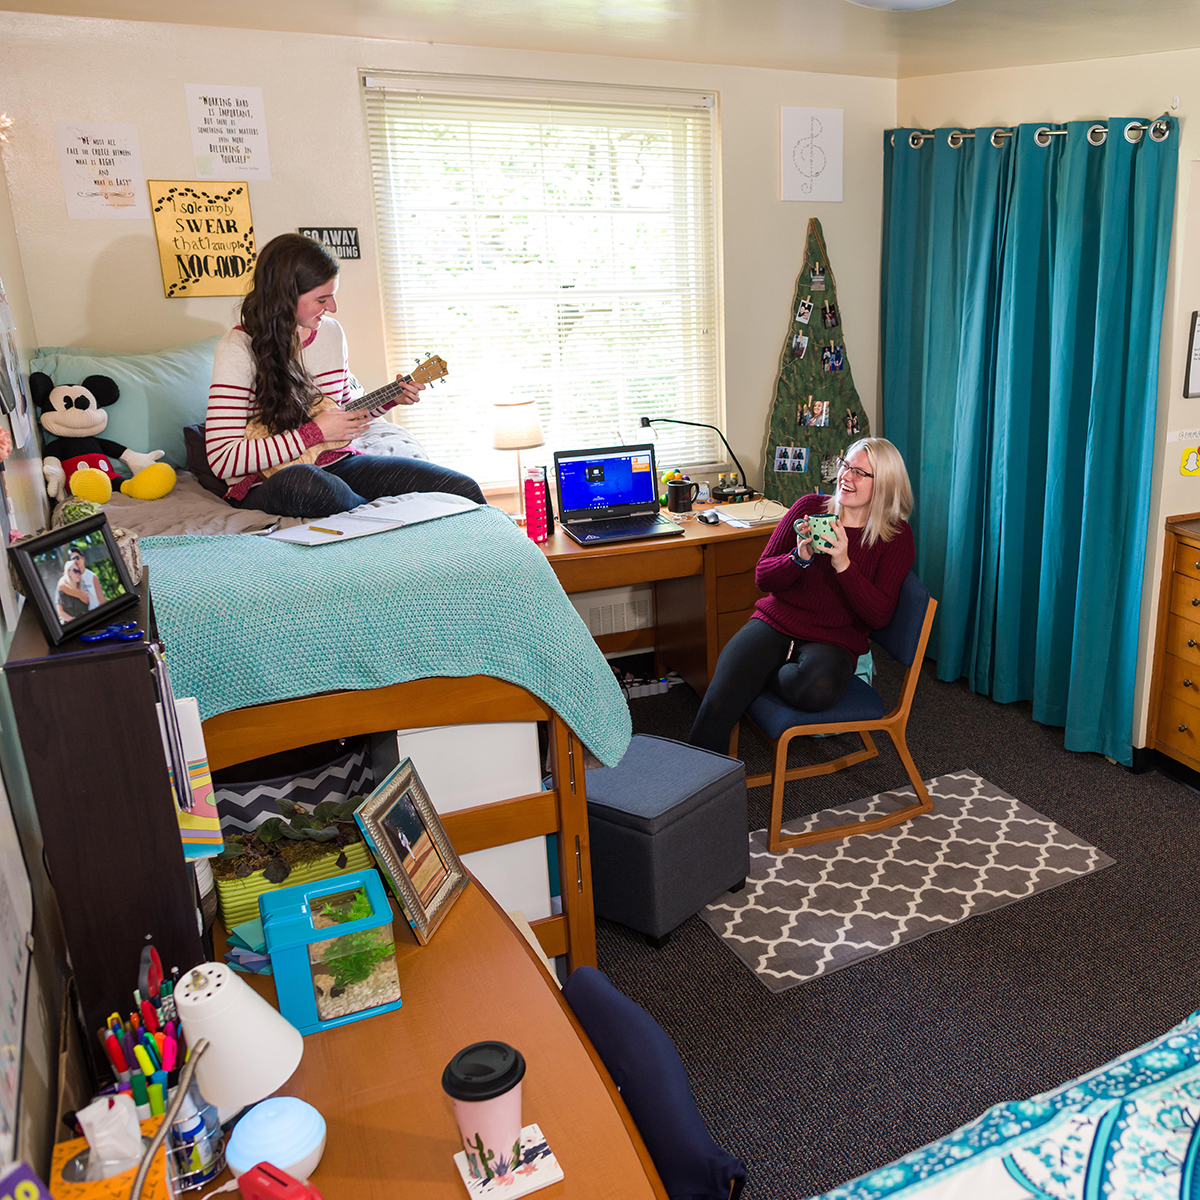 Photo of two roommates laughing and hanging out in their dorm room. One of them is playing a ukulele.